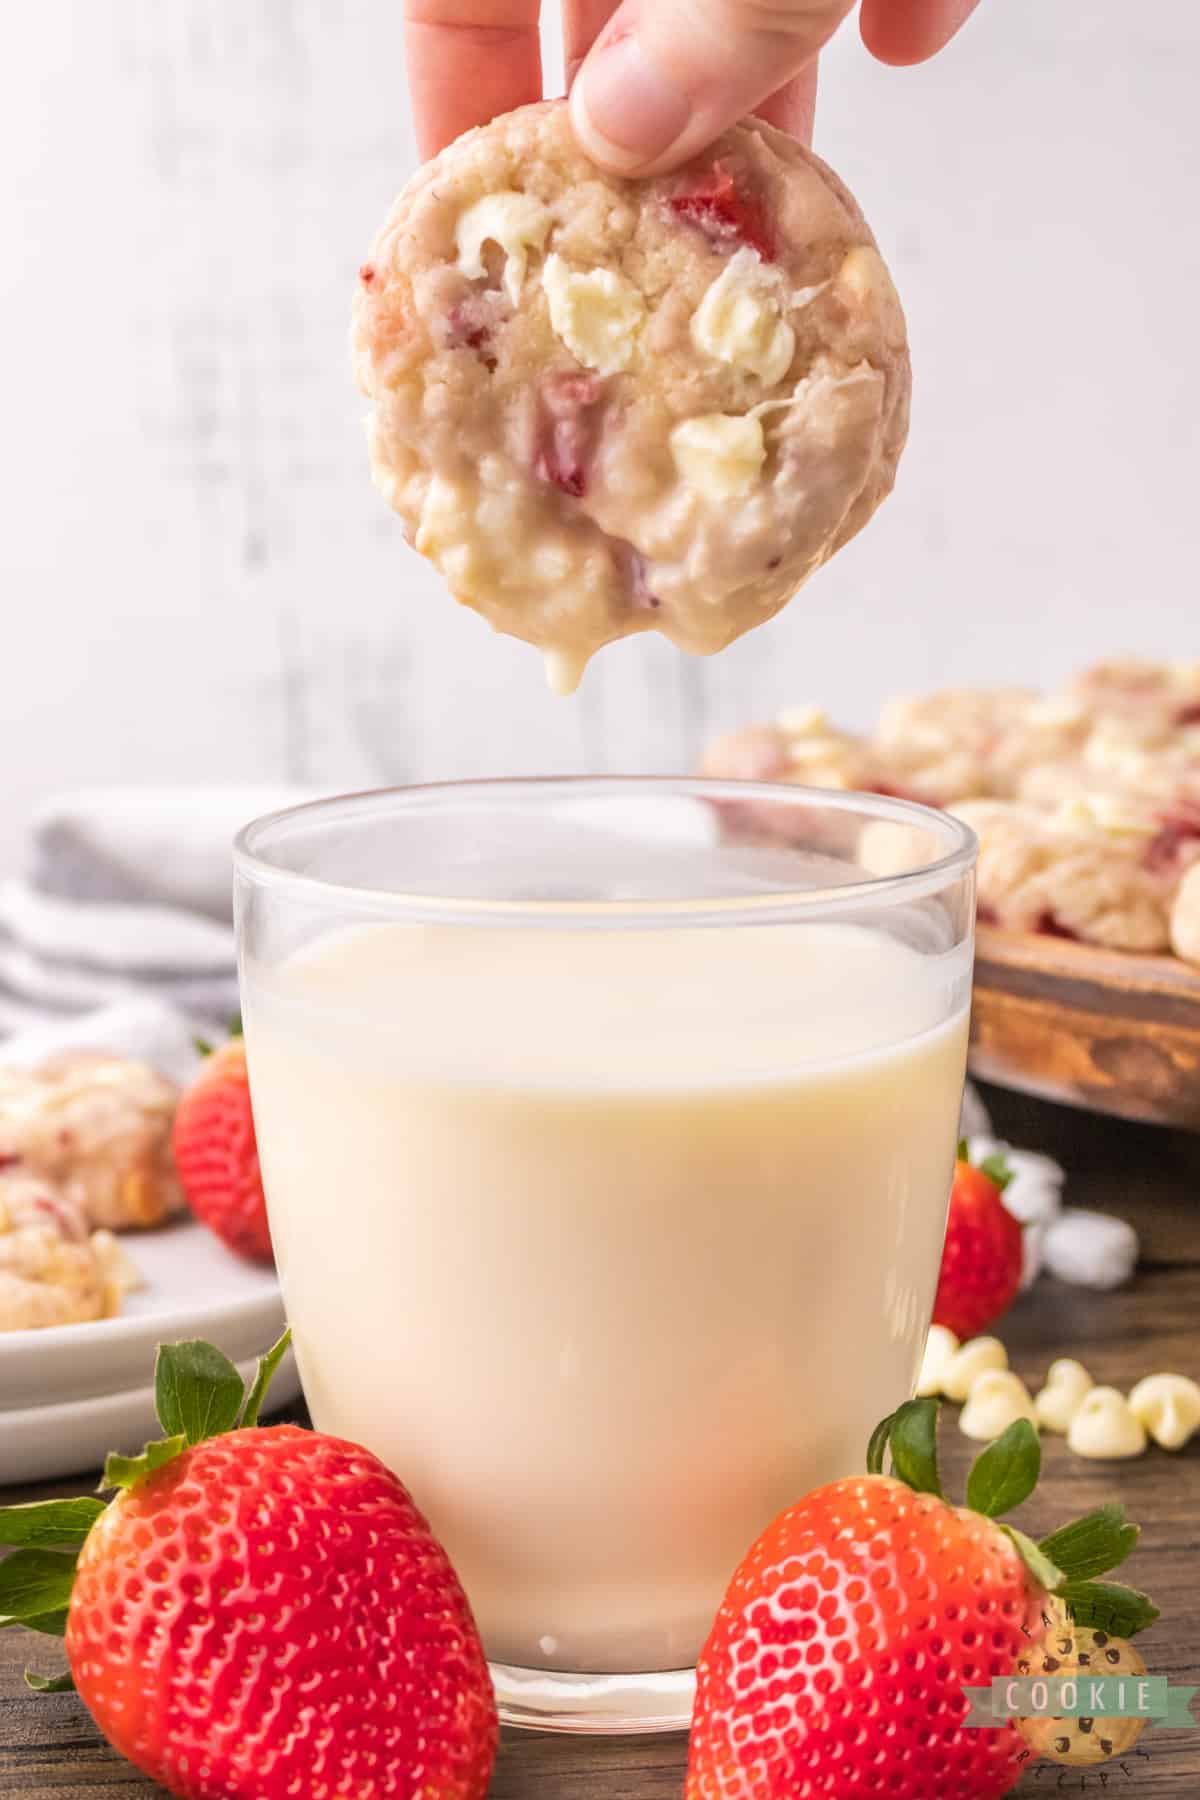 Strawberry Cookie dipped in milk